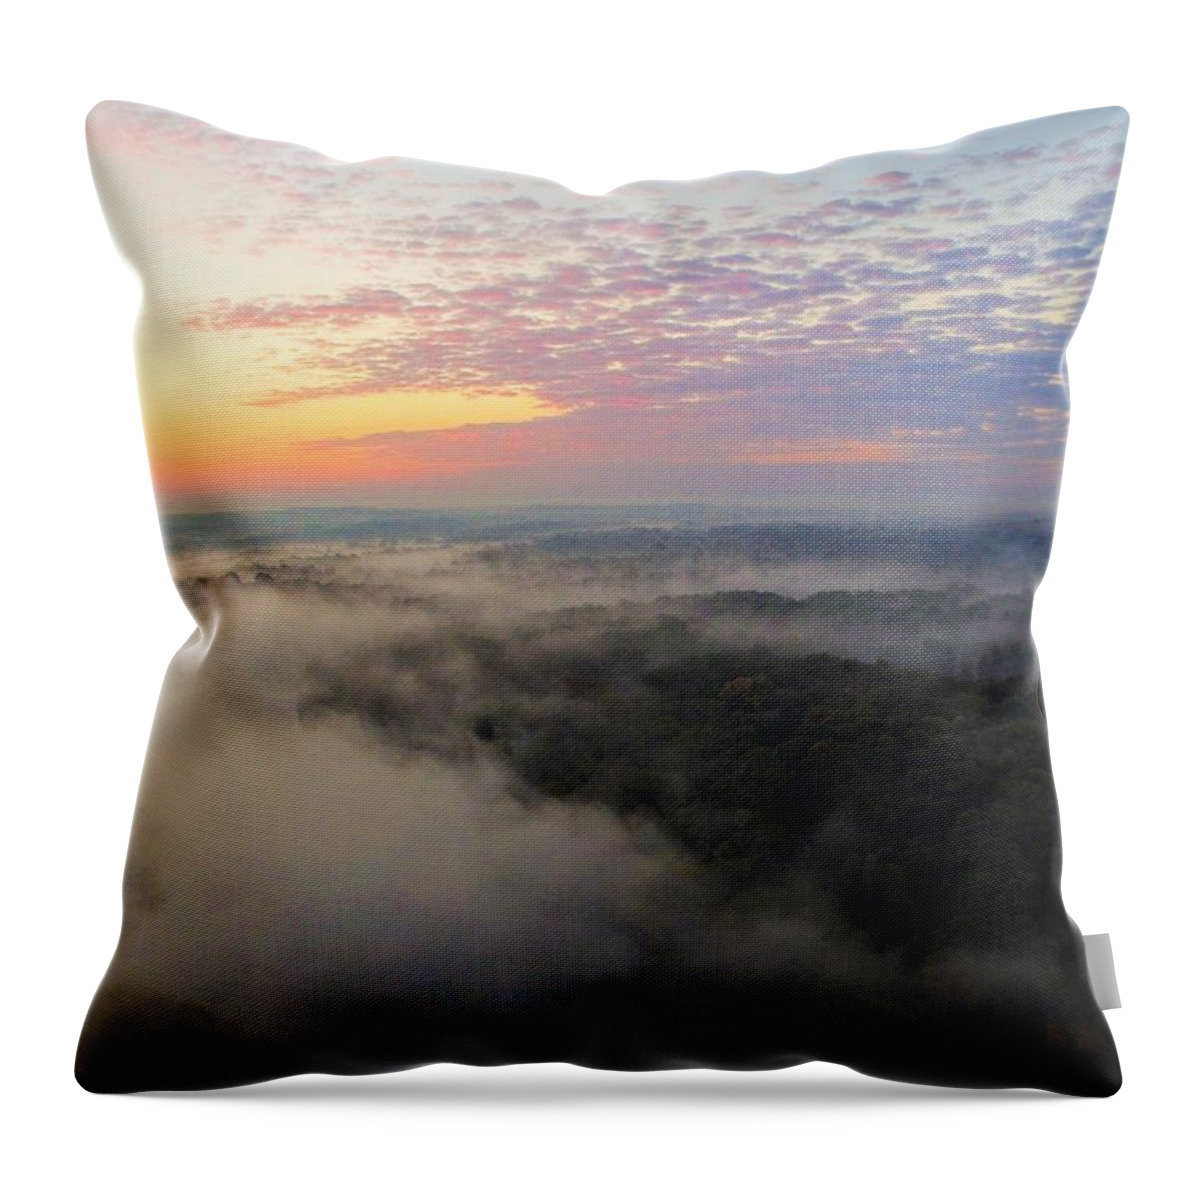  Throw Pillow featuring the photograph Foggy Sunrise by Brad Nellis